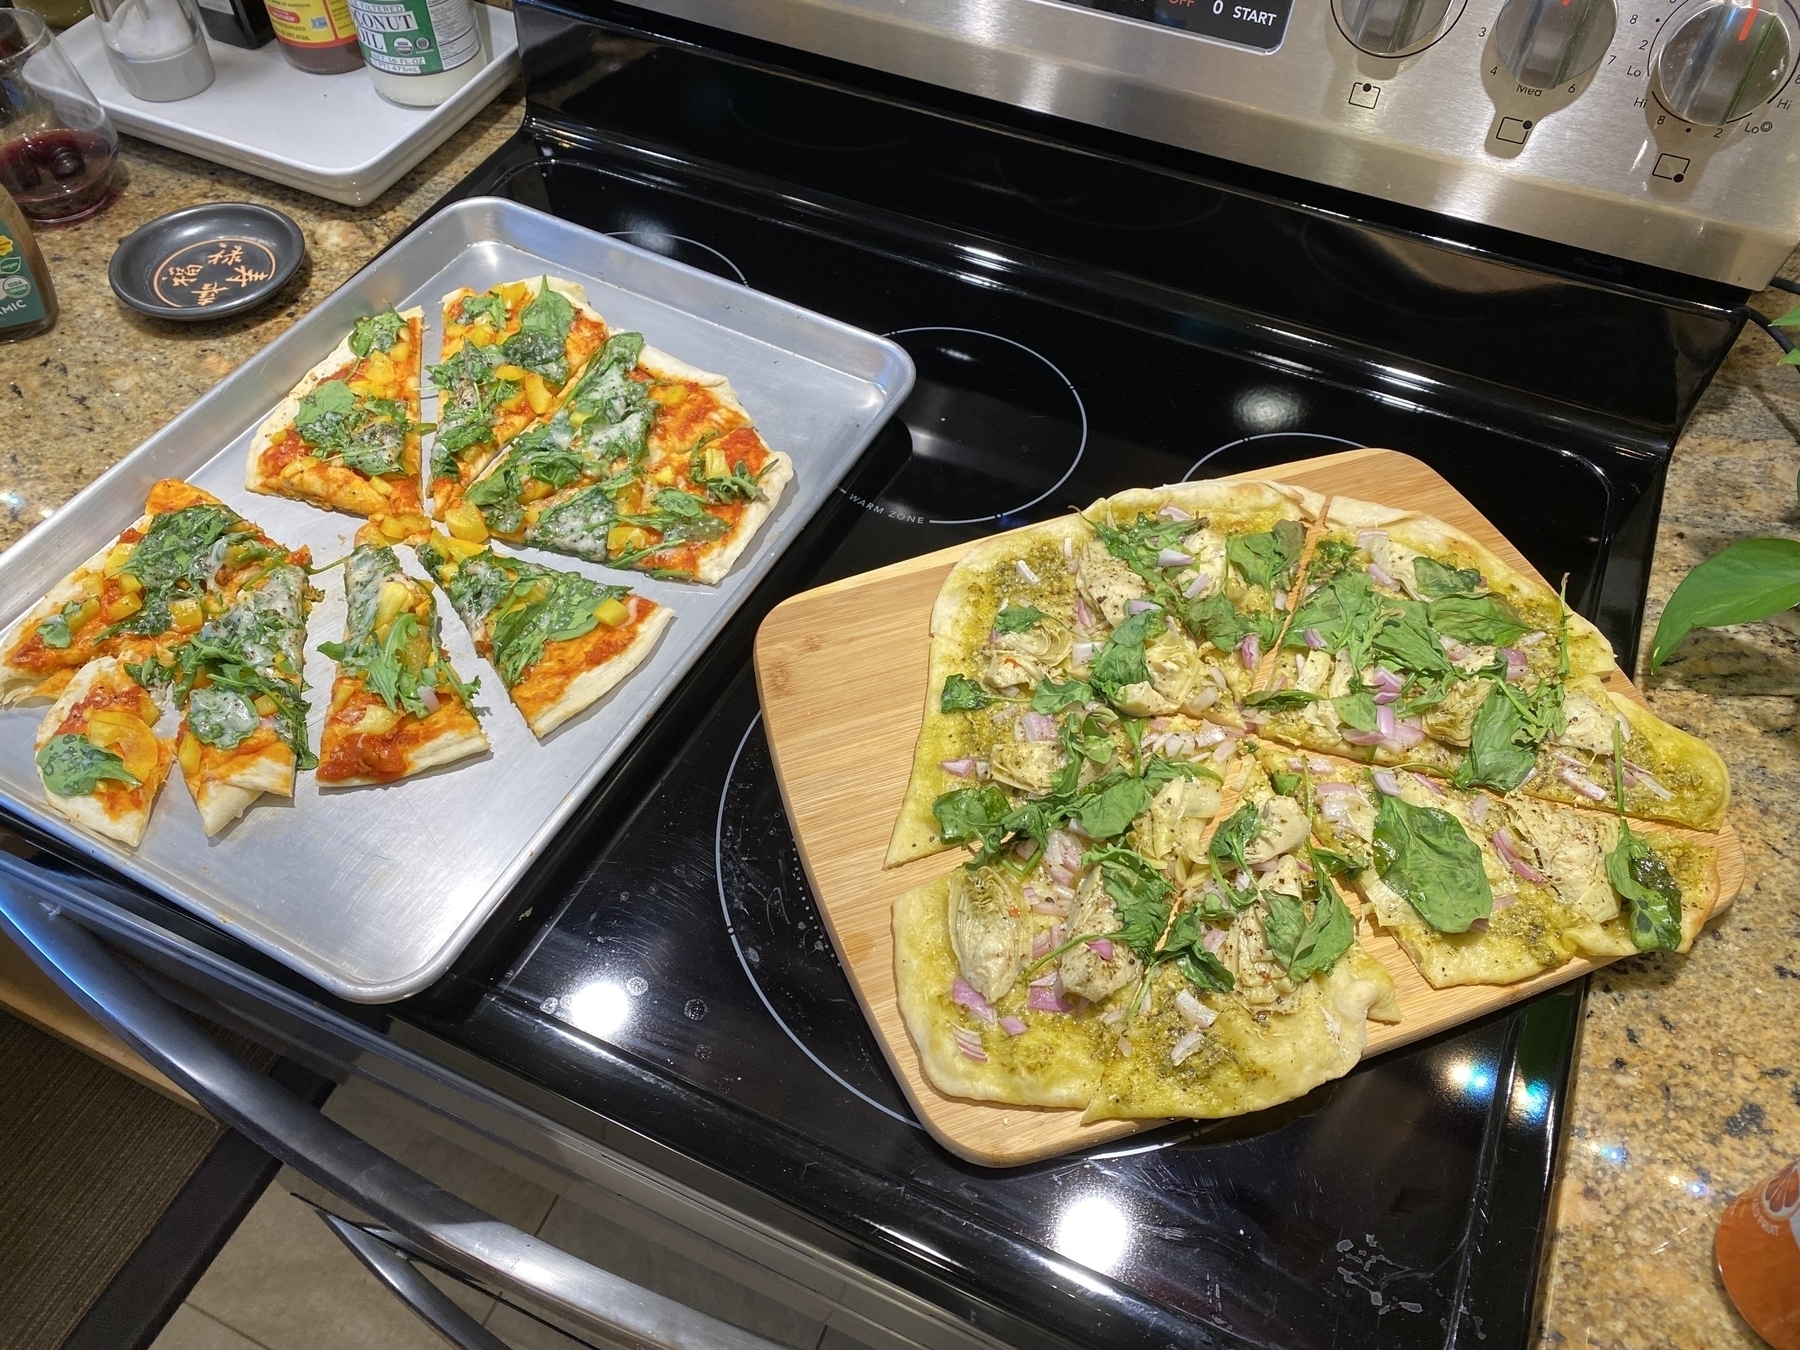 Two homemade pizzas on a stove top